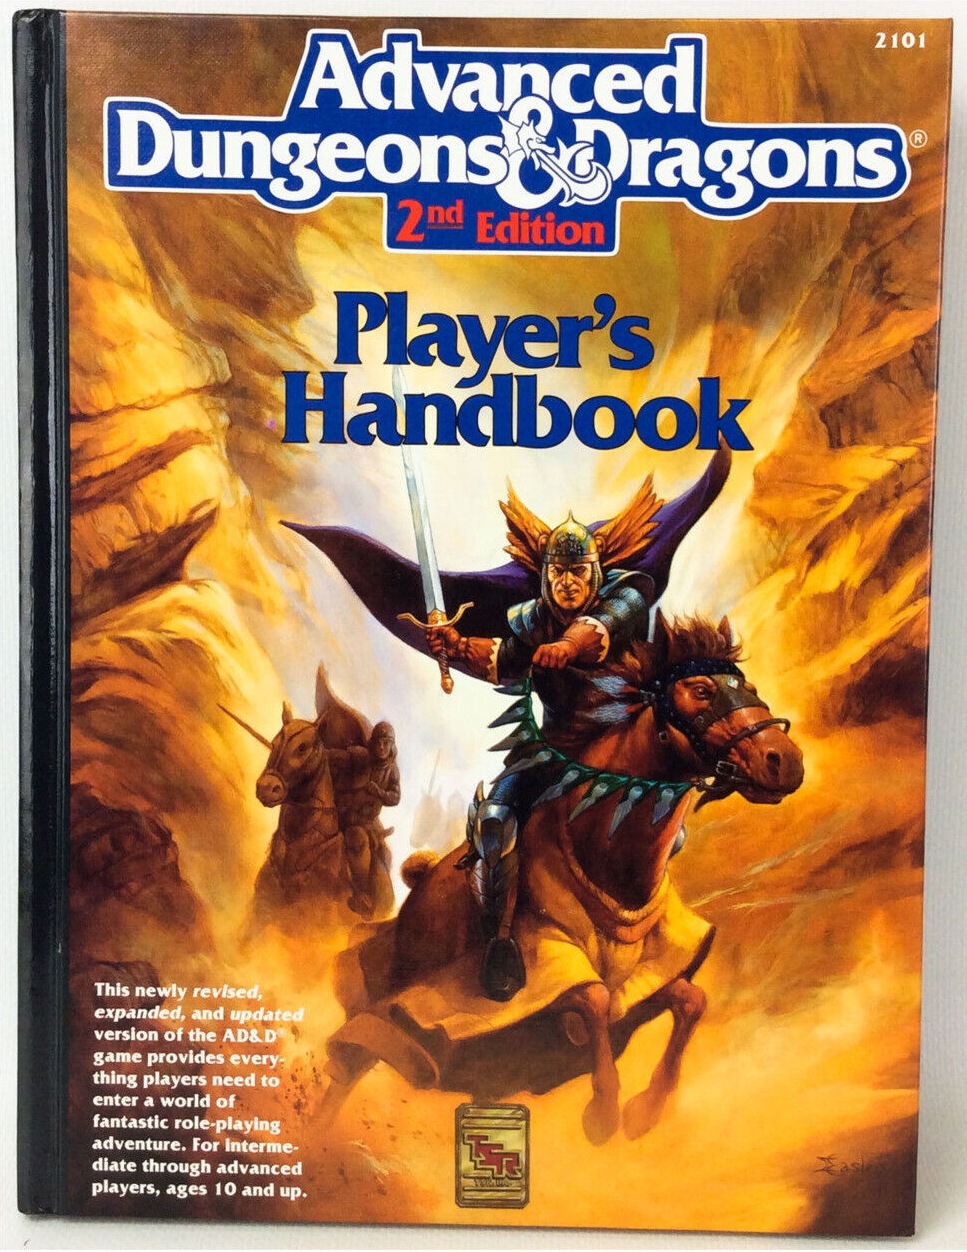 2nd Ed dnd player's handbook, the version that would have been current at the time.